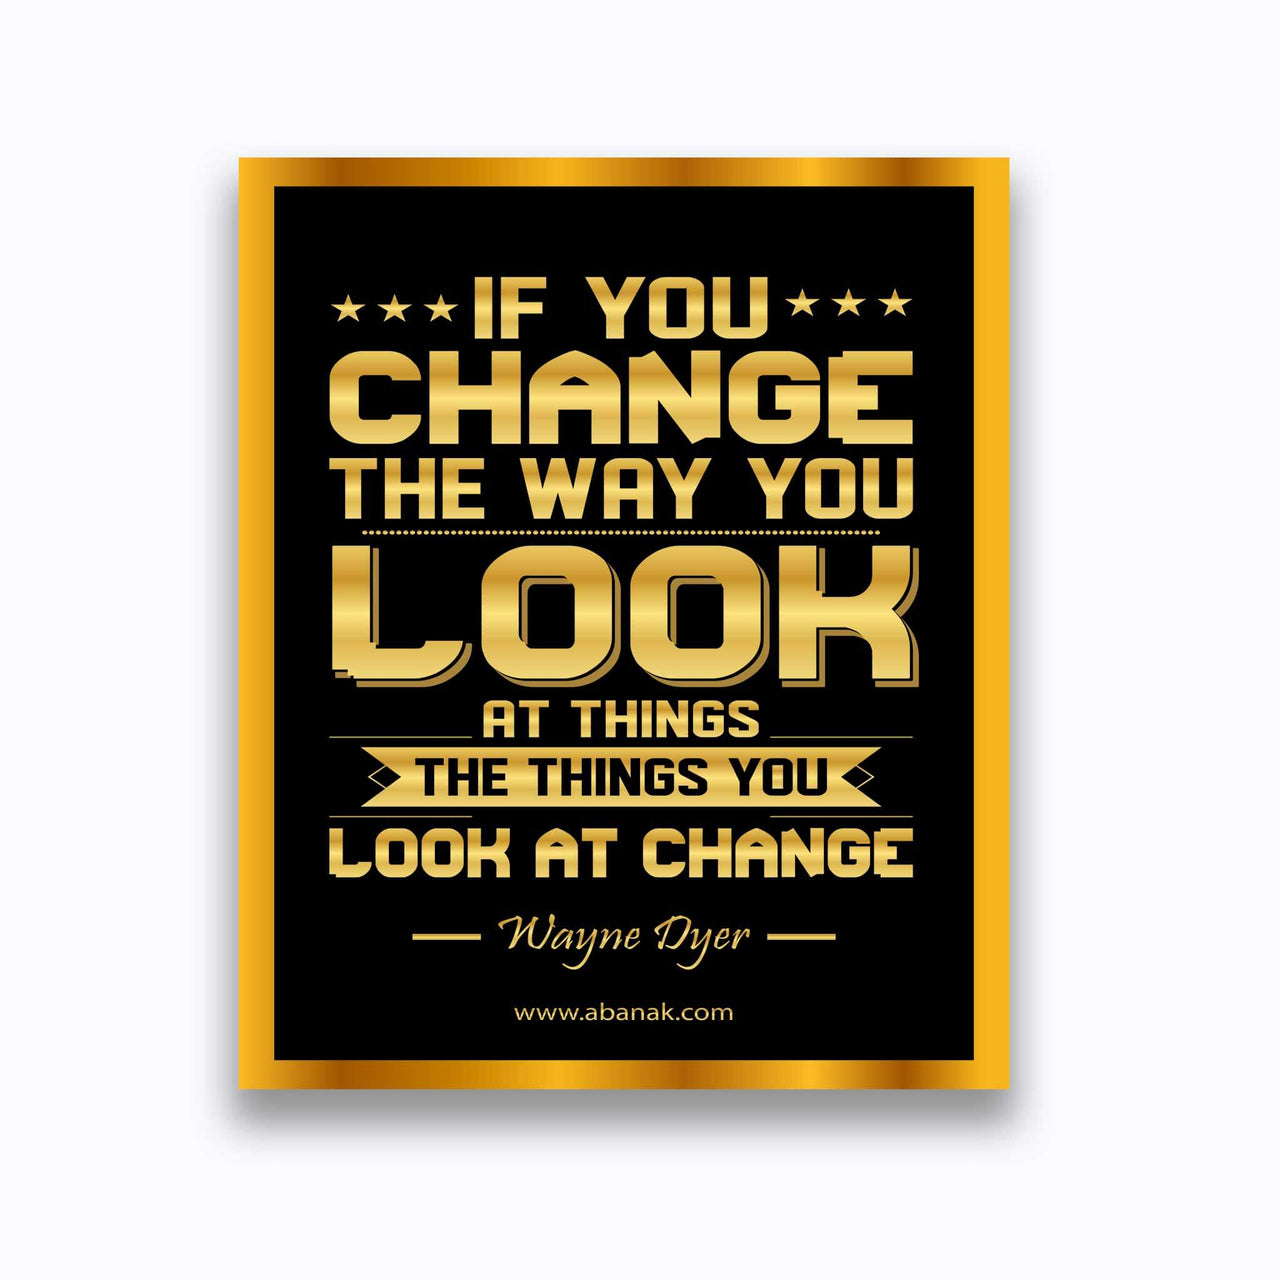 Change the Way You Look - Wayne Dyer Quote - Canvas Print